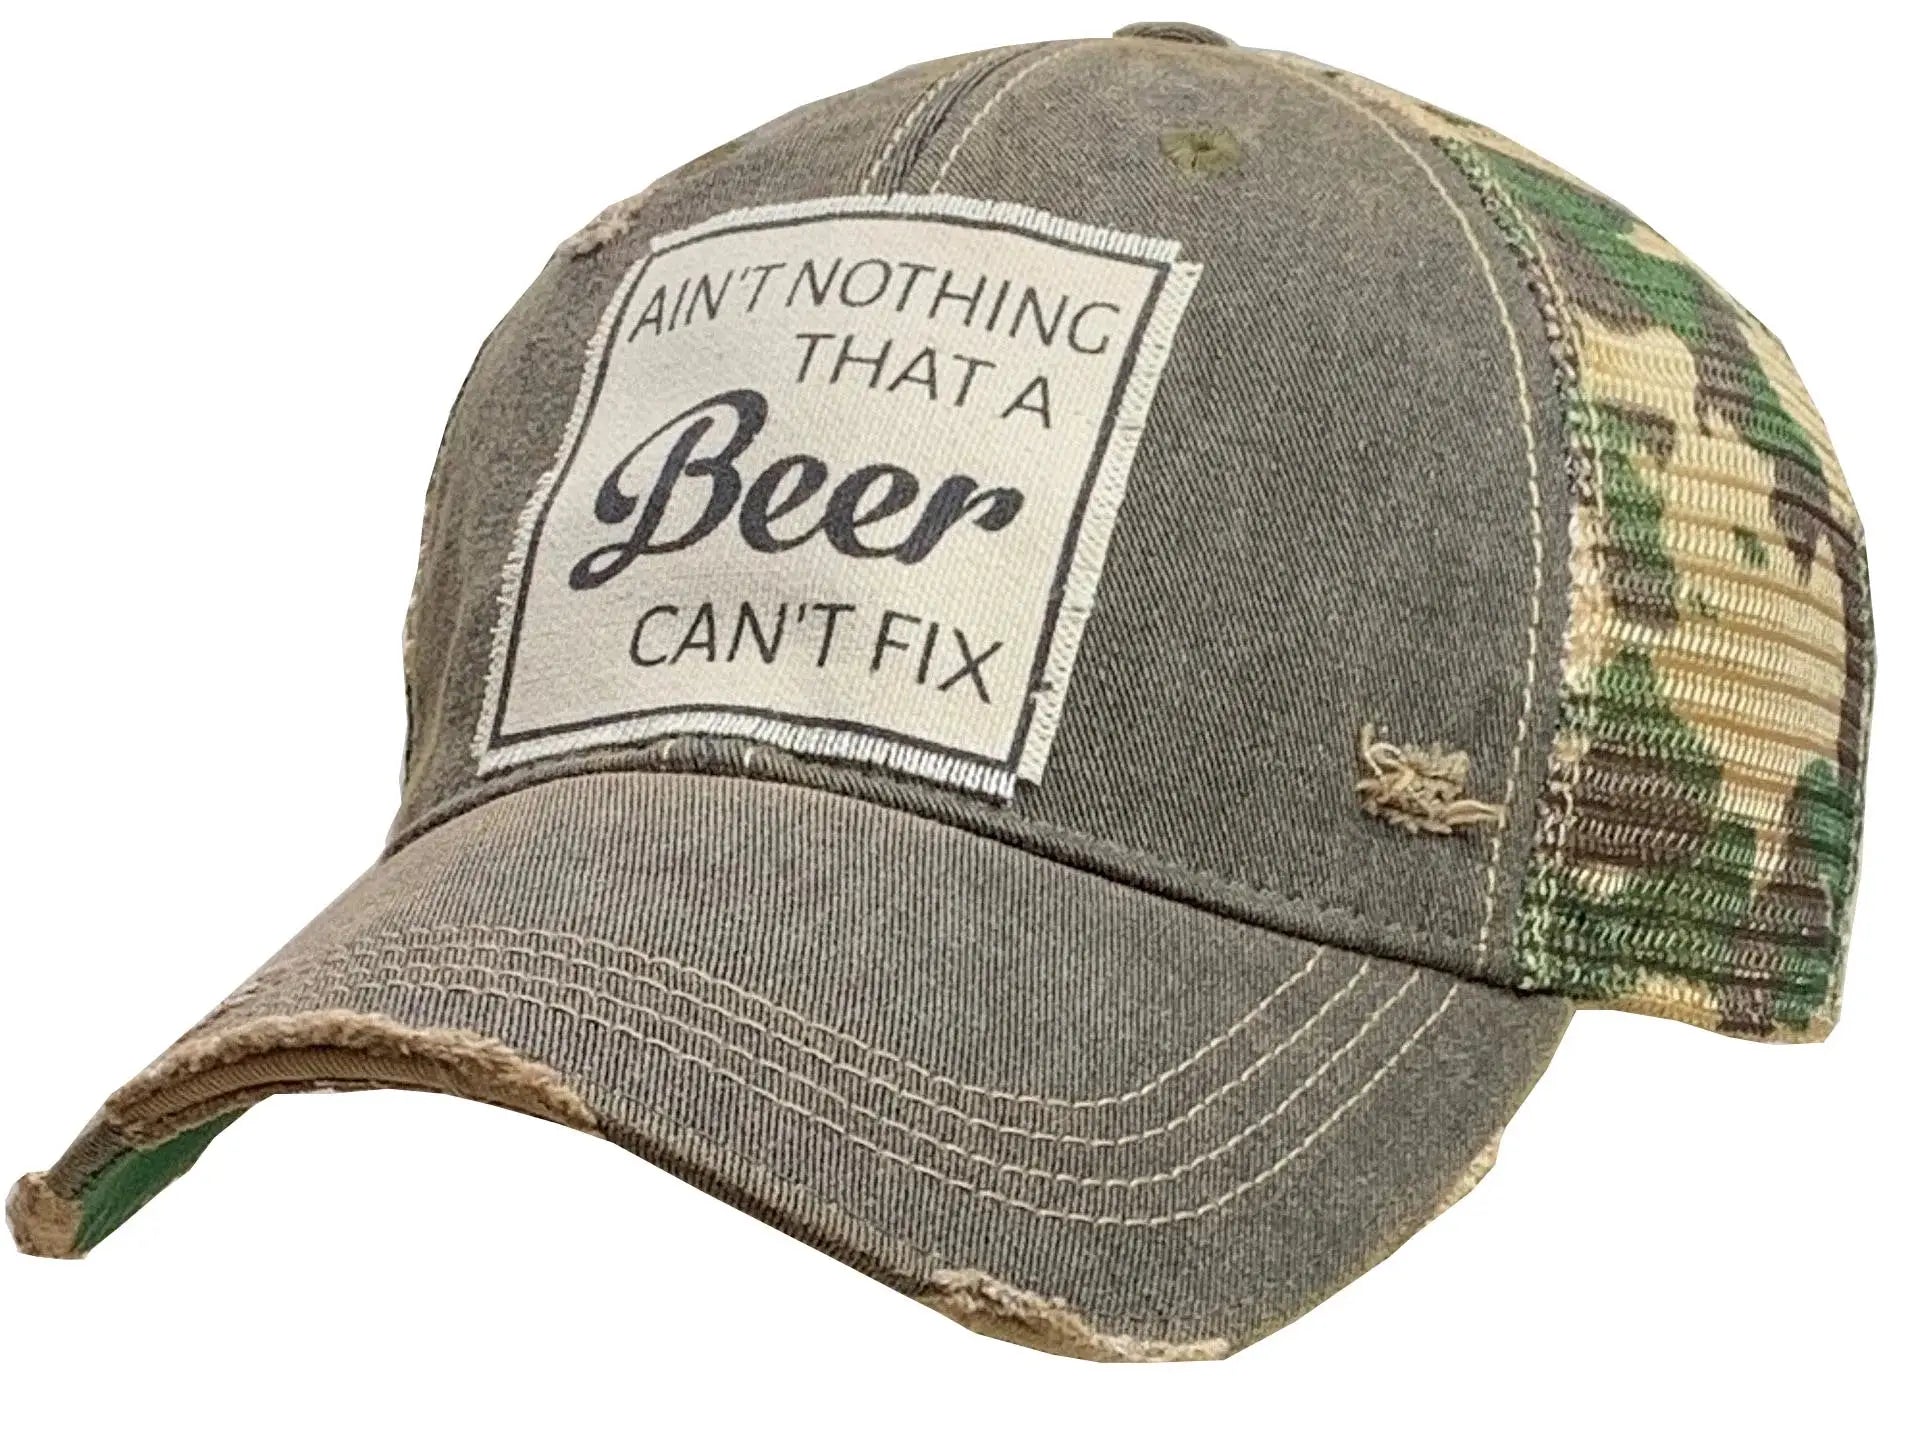 Ain't Nothing That a Beer Can't Fix Distressed Trucker Hat - Bay-Tique